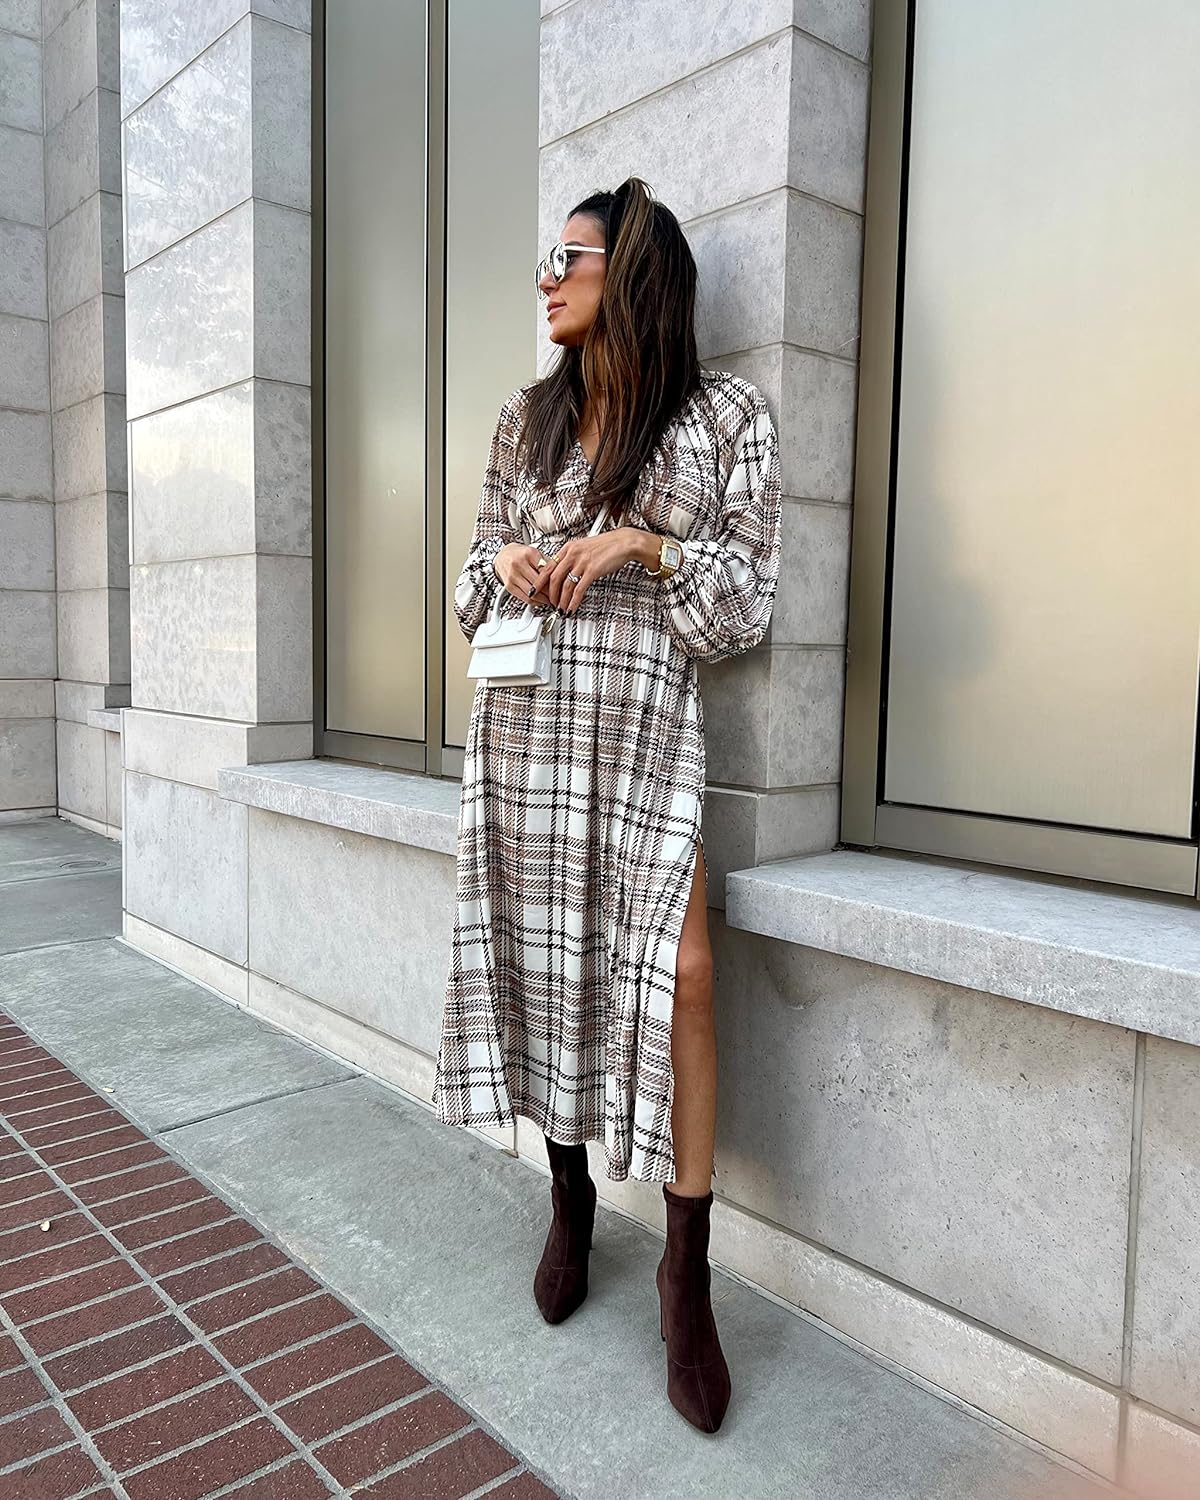 The Drop Women' Plaid Printed Romantic Dress by @christineandrew